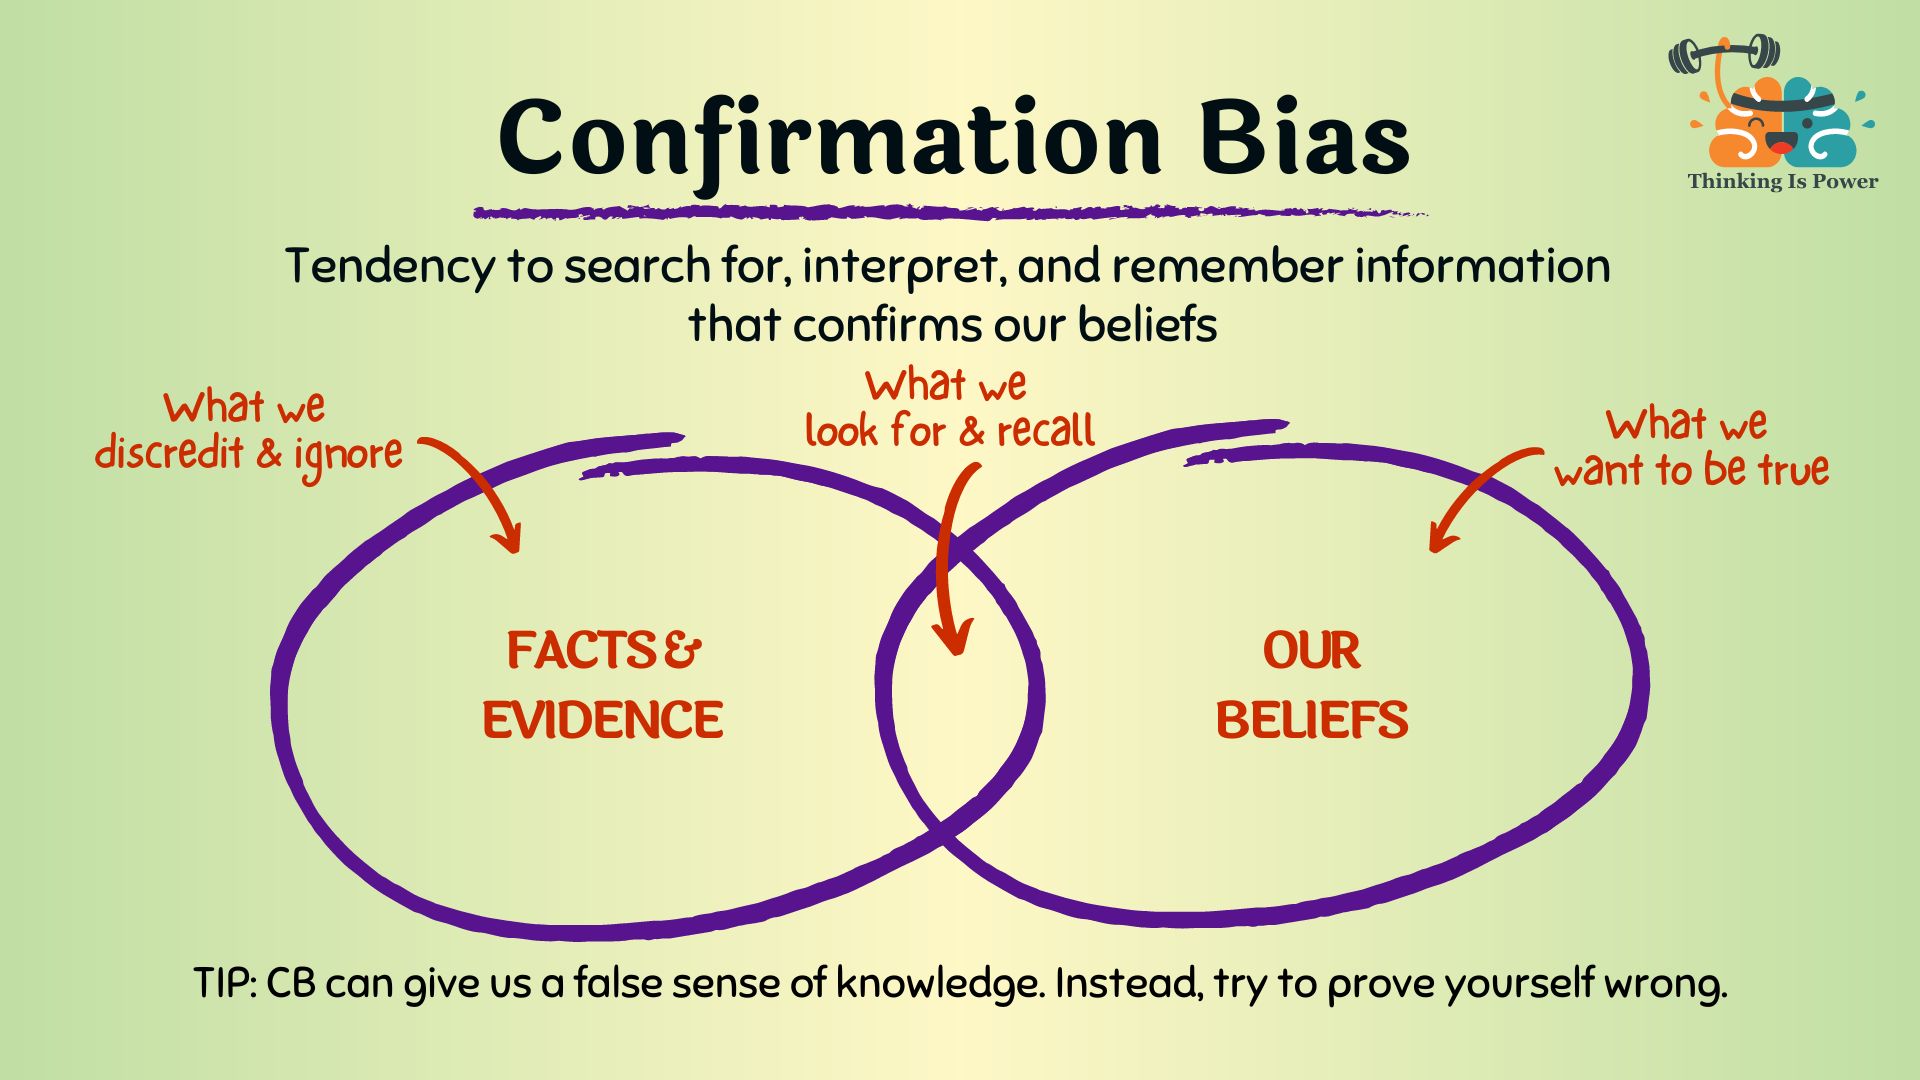 Confirmation bias is the tendency to search for, interpret, and remember information that confirms our beliefs. Shown is a Venn diagram with facts and evidence that we ignore, and our beliefs or what we want to be true. The overlap is what we look for and recall. Tip: Confirmation bias can give us a false sense of knowledge. Instead try to prove yourself wrong.